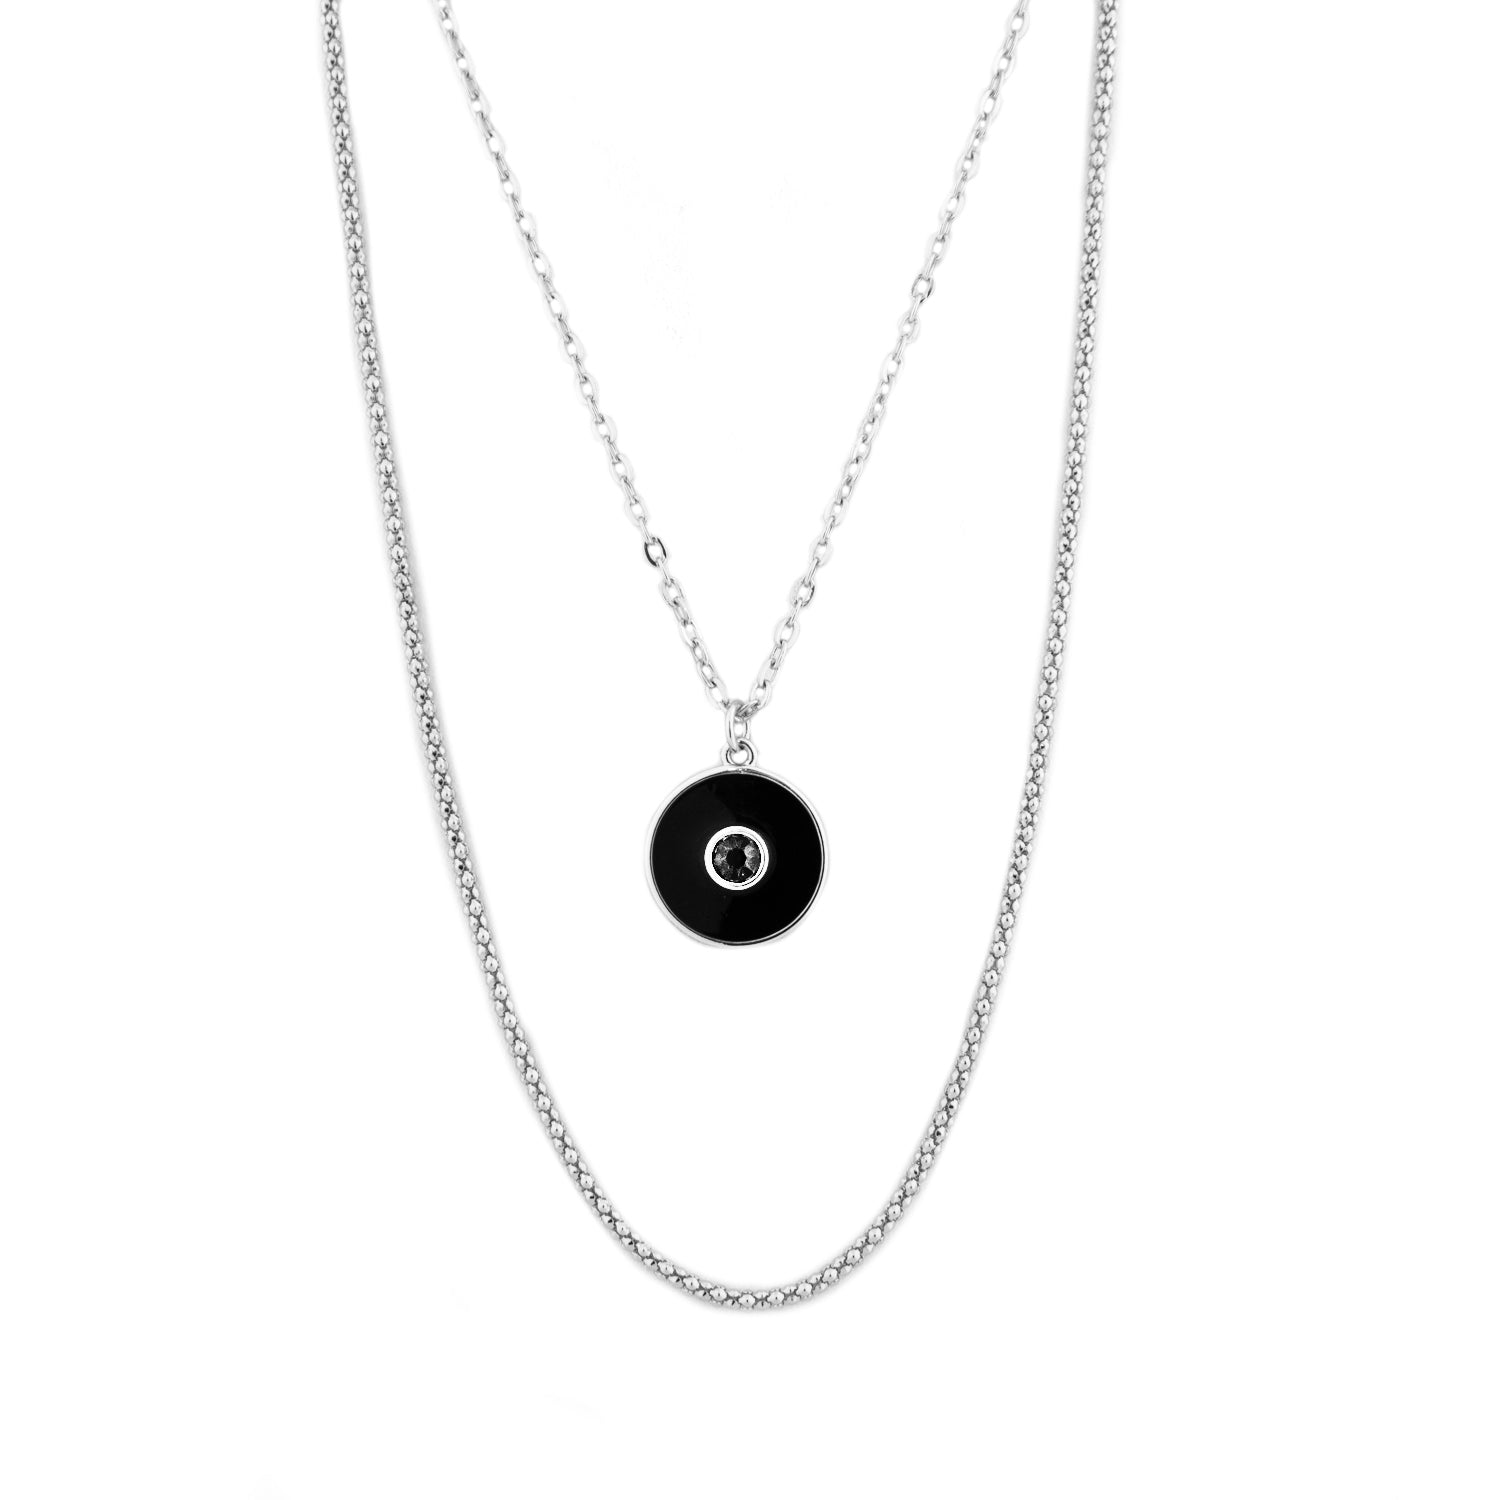 Buy Silver Layered Disc Bar and Double Ring Chain Necklace | JaeBee